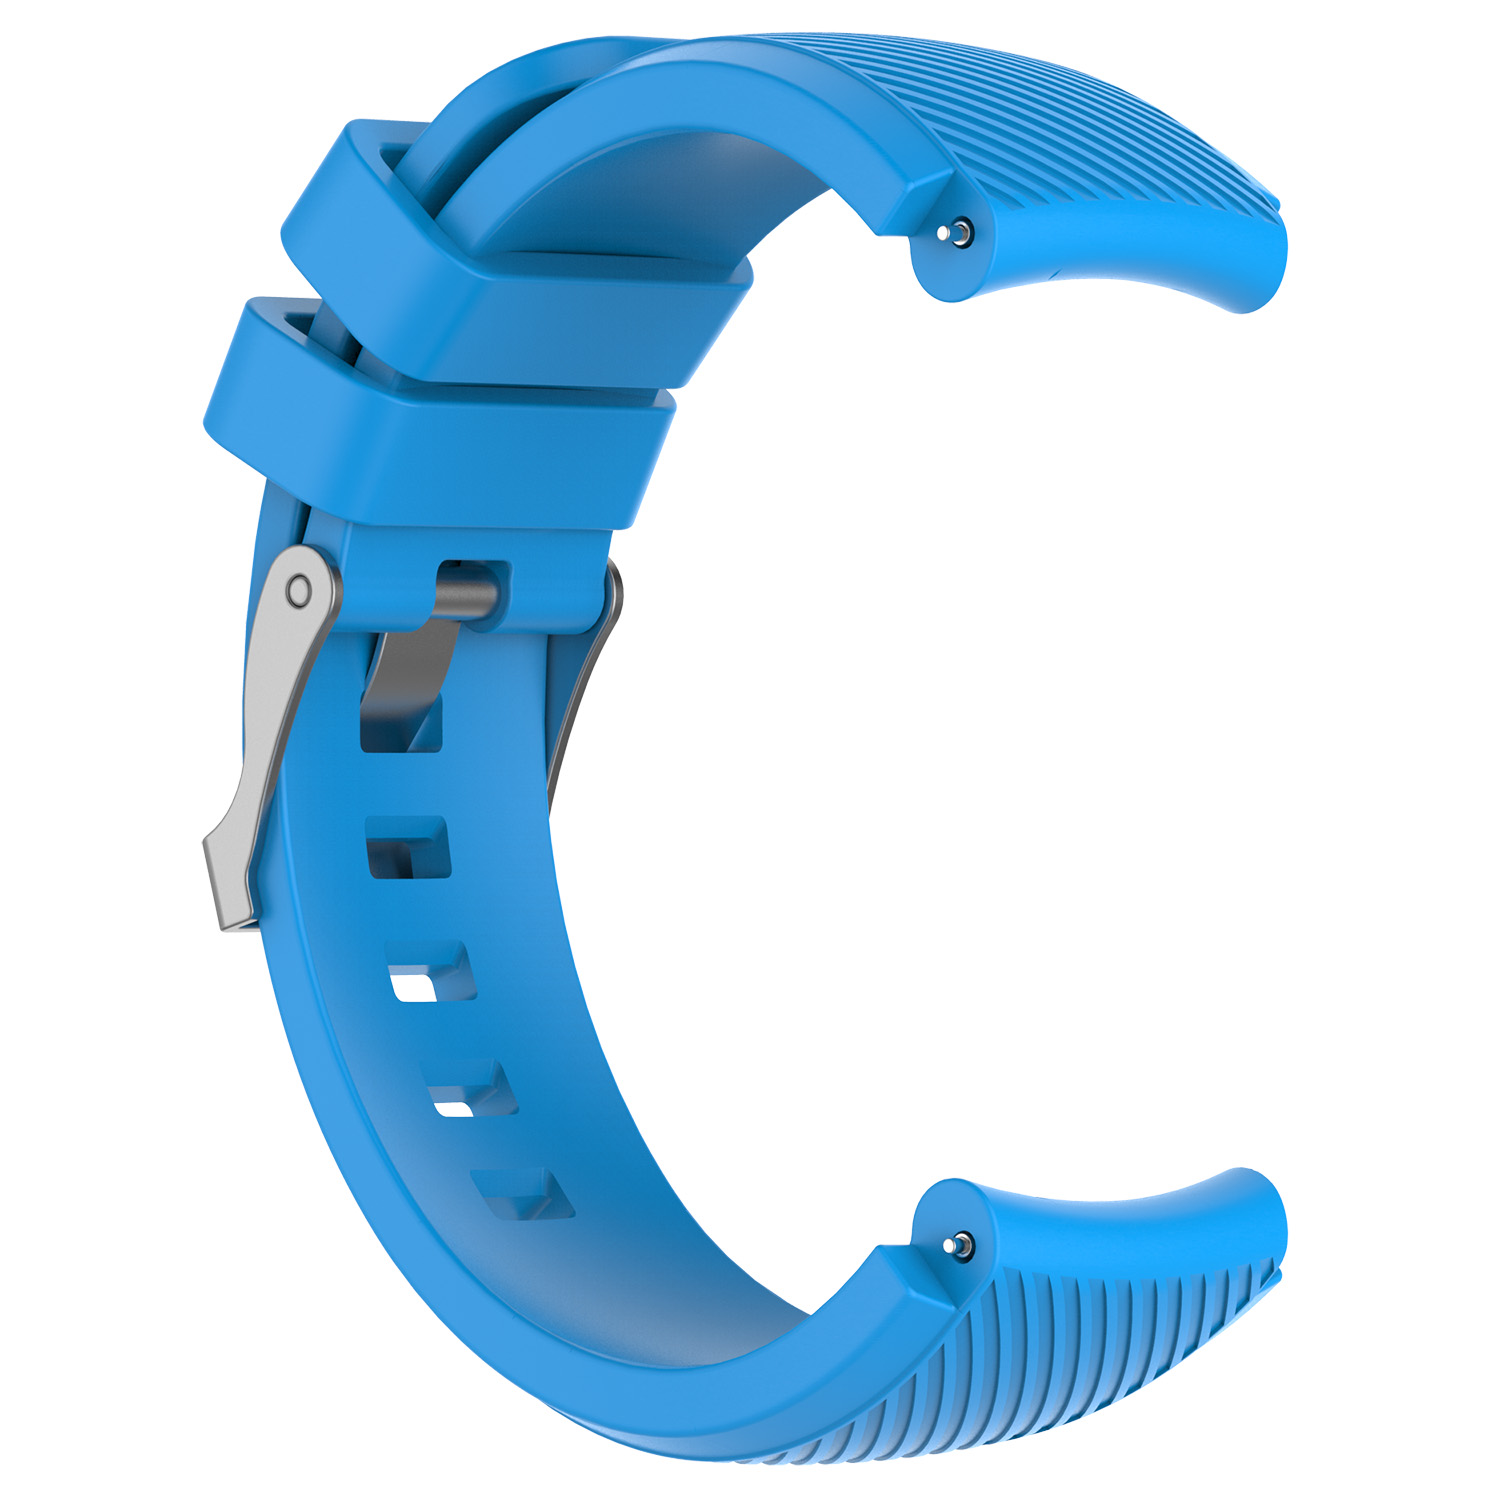 Bakeey-22mm-Universal-Watch-Band-Silicone-Watch-Strap-Replacement-for-HUAWEI-Watch-GT-1730954-8